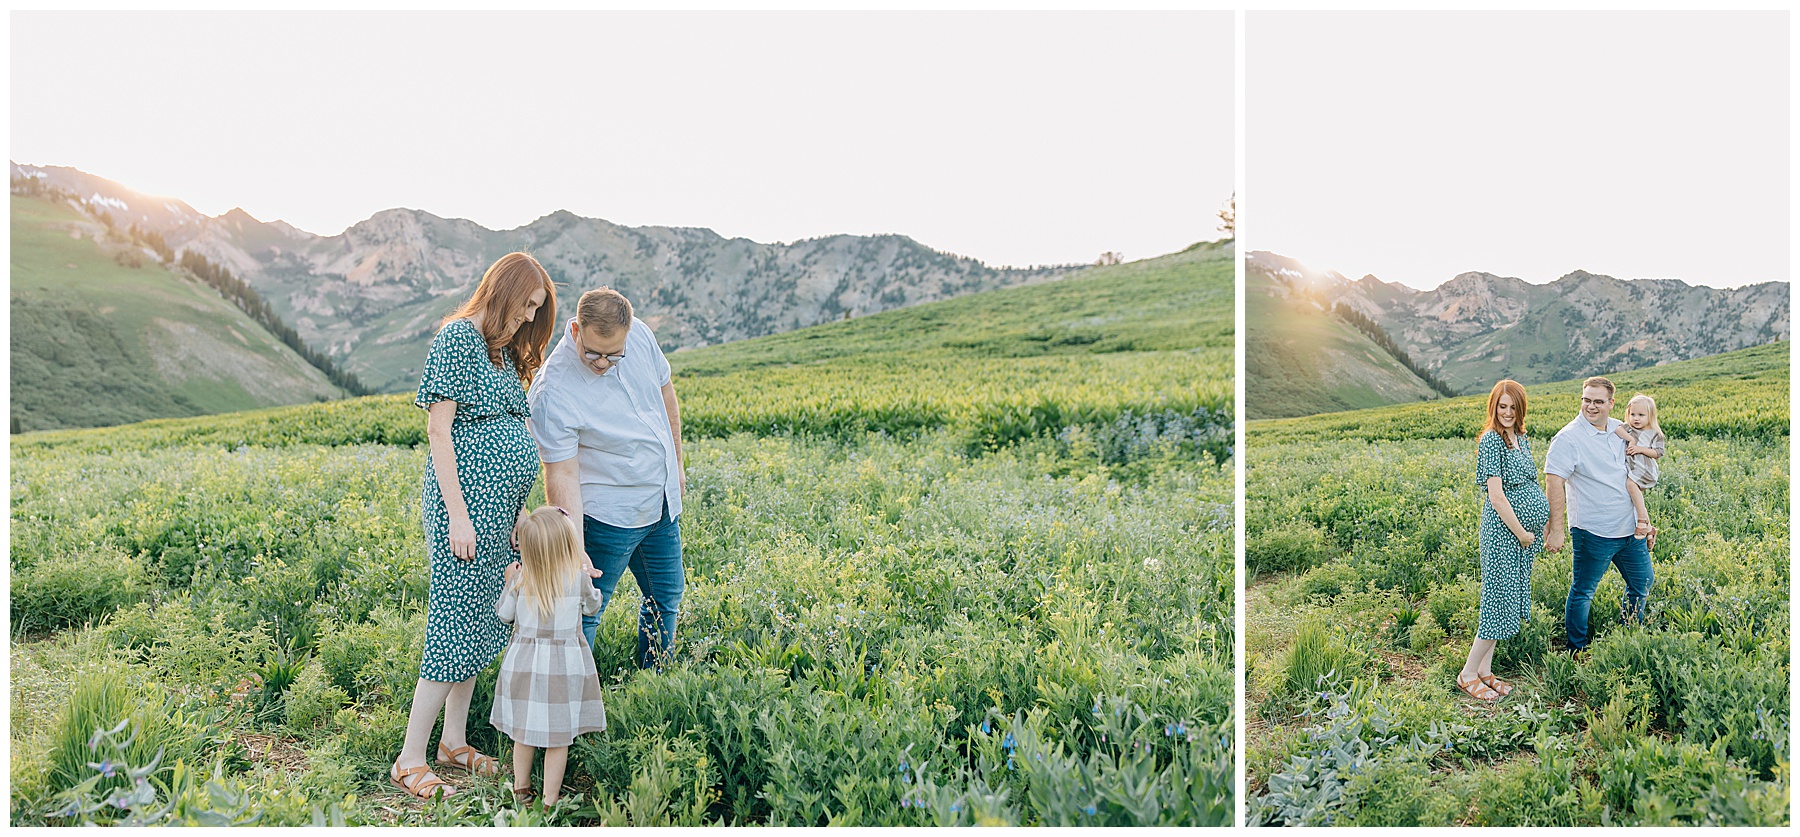 Peart | Albion Basin Maternity Session